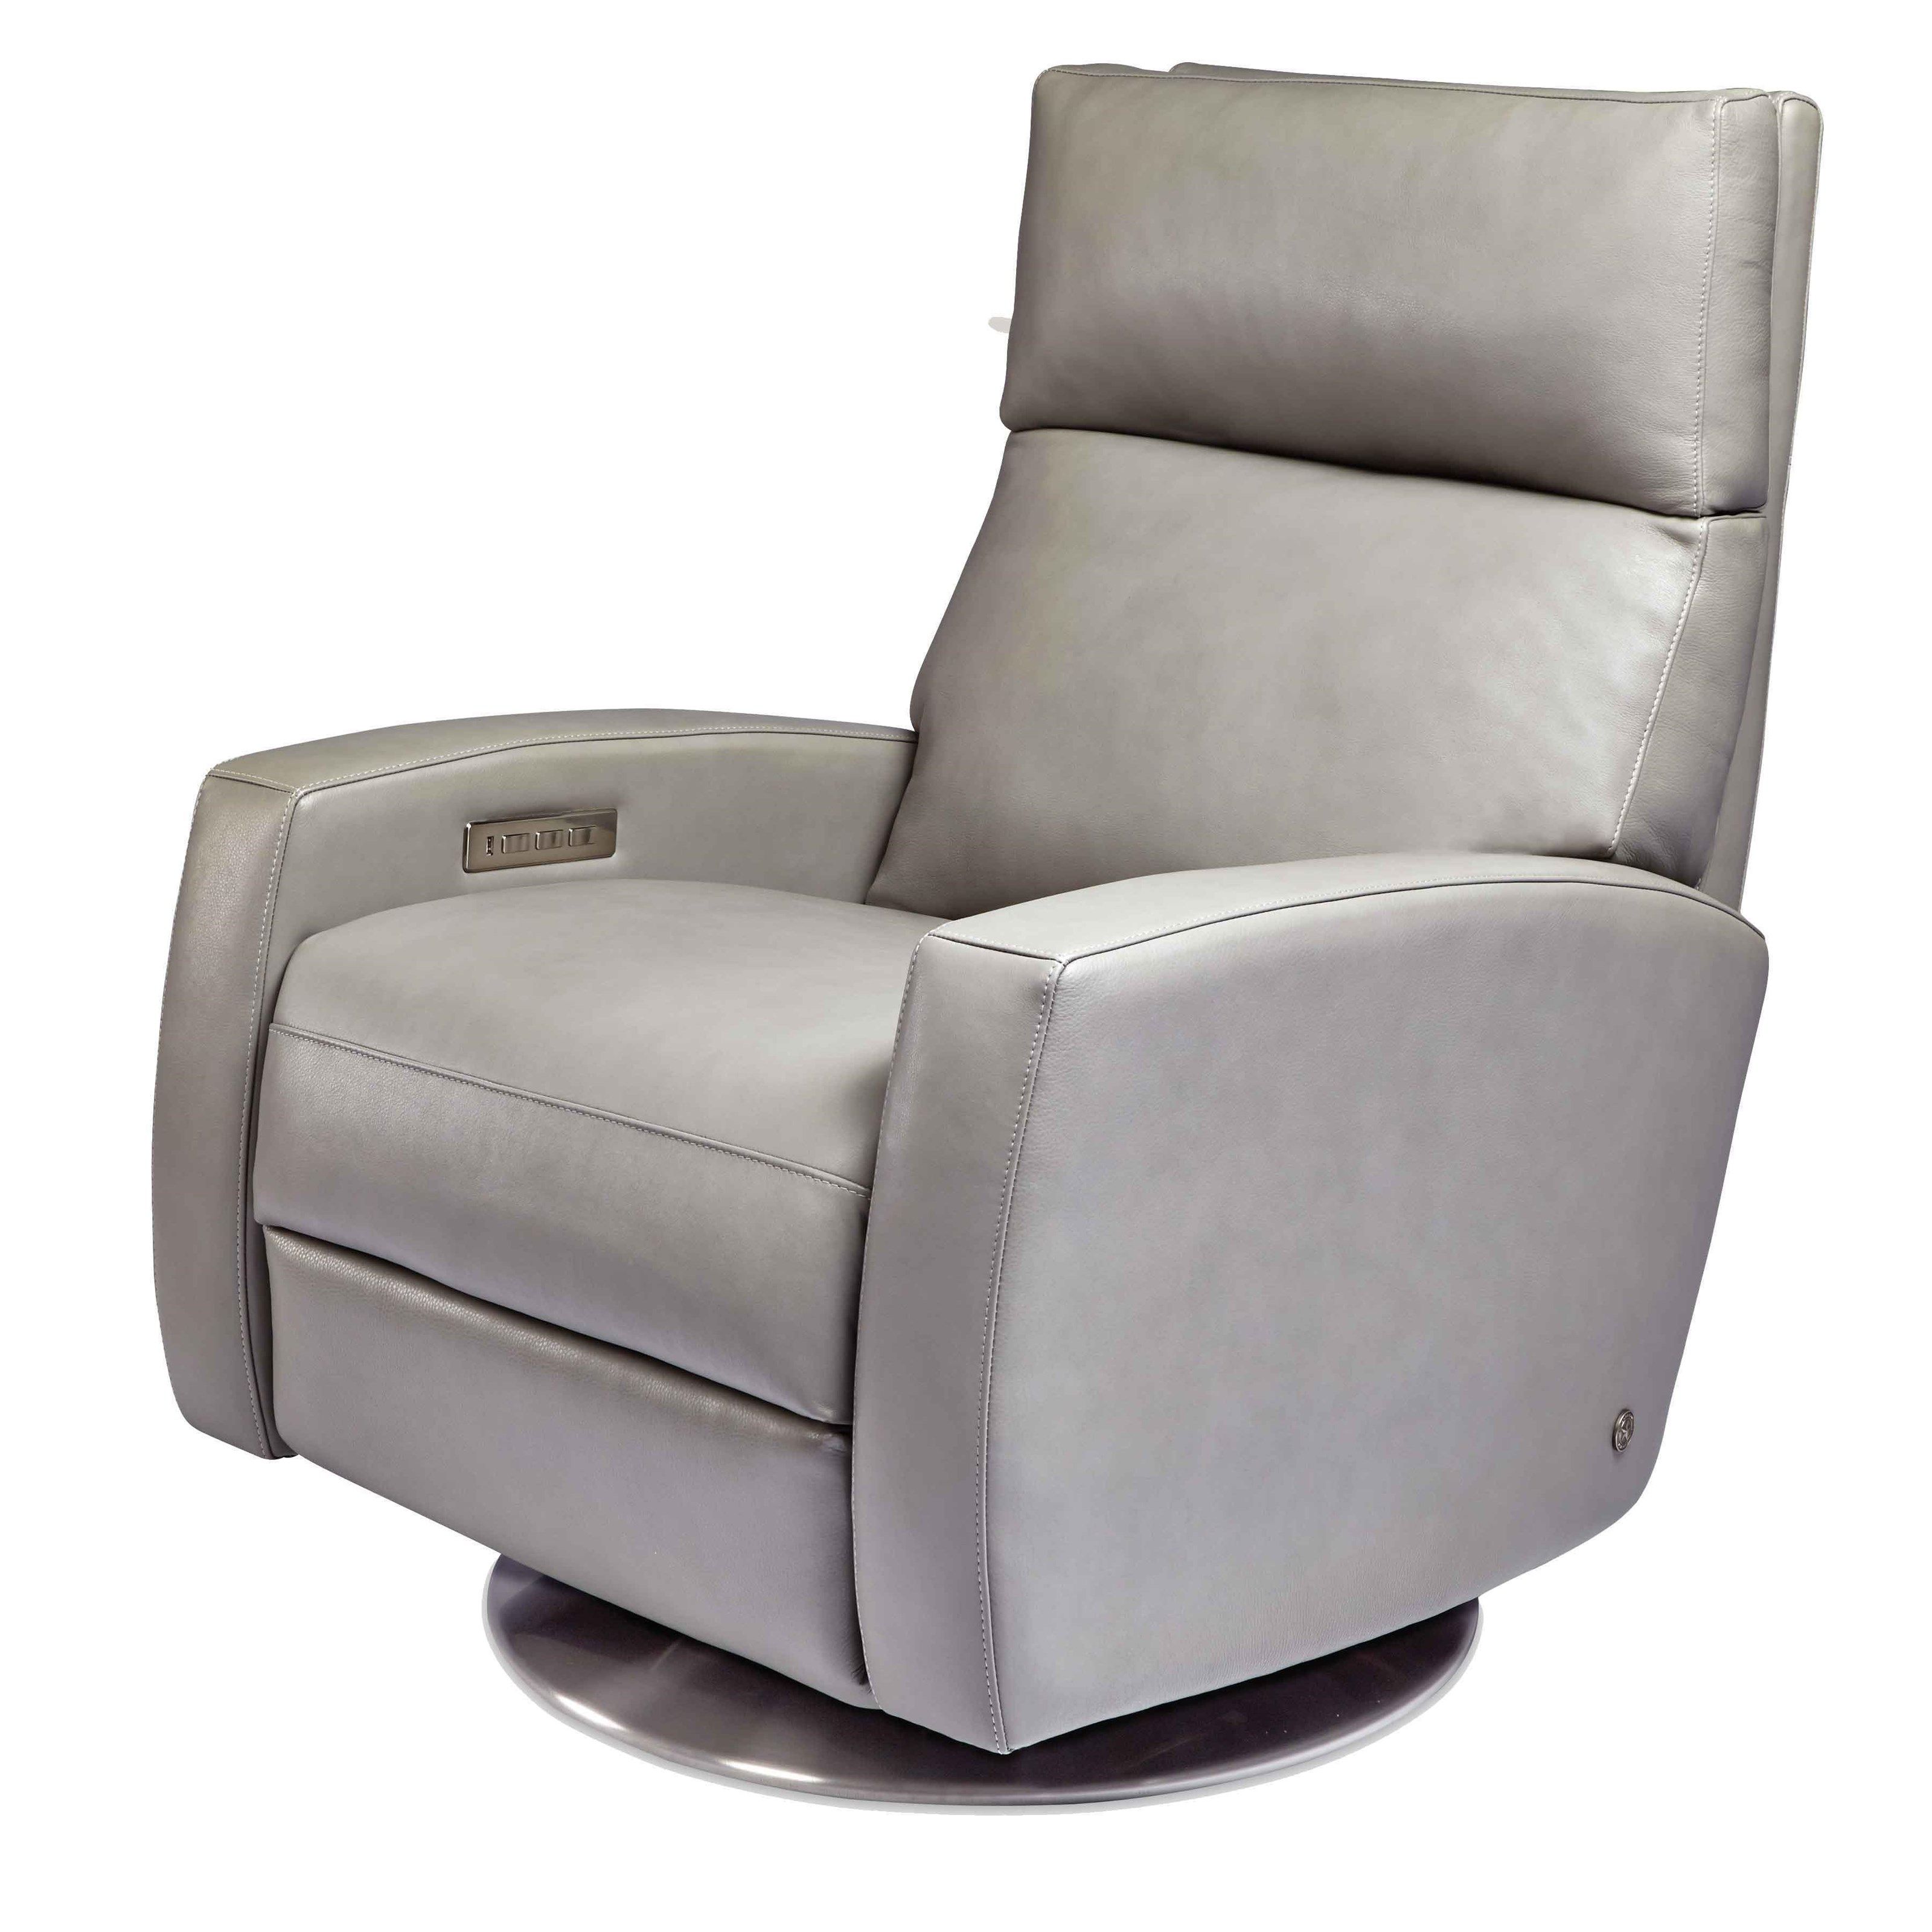 Chairs | Furniture Barn & Manor House Within Manor Grey Swivel Chairs (View 7 of 20)